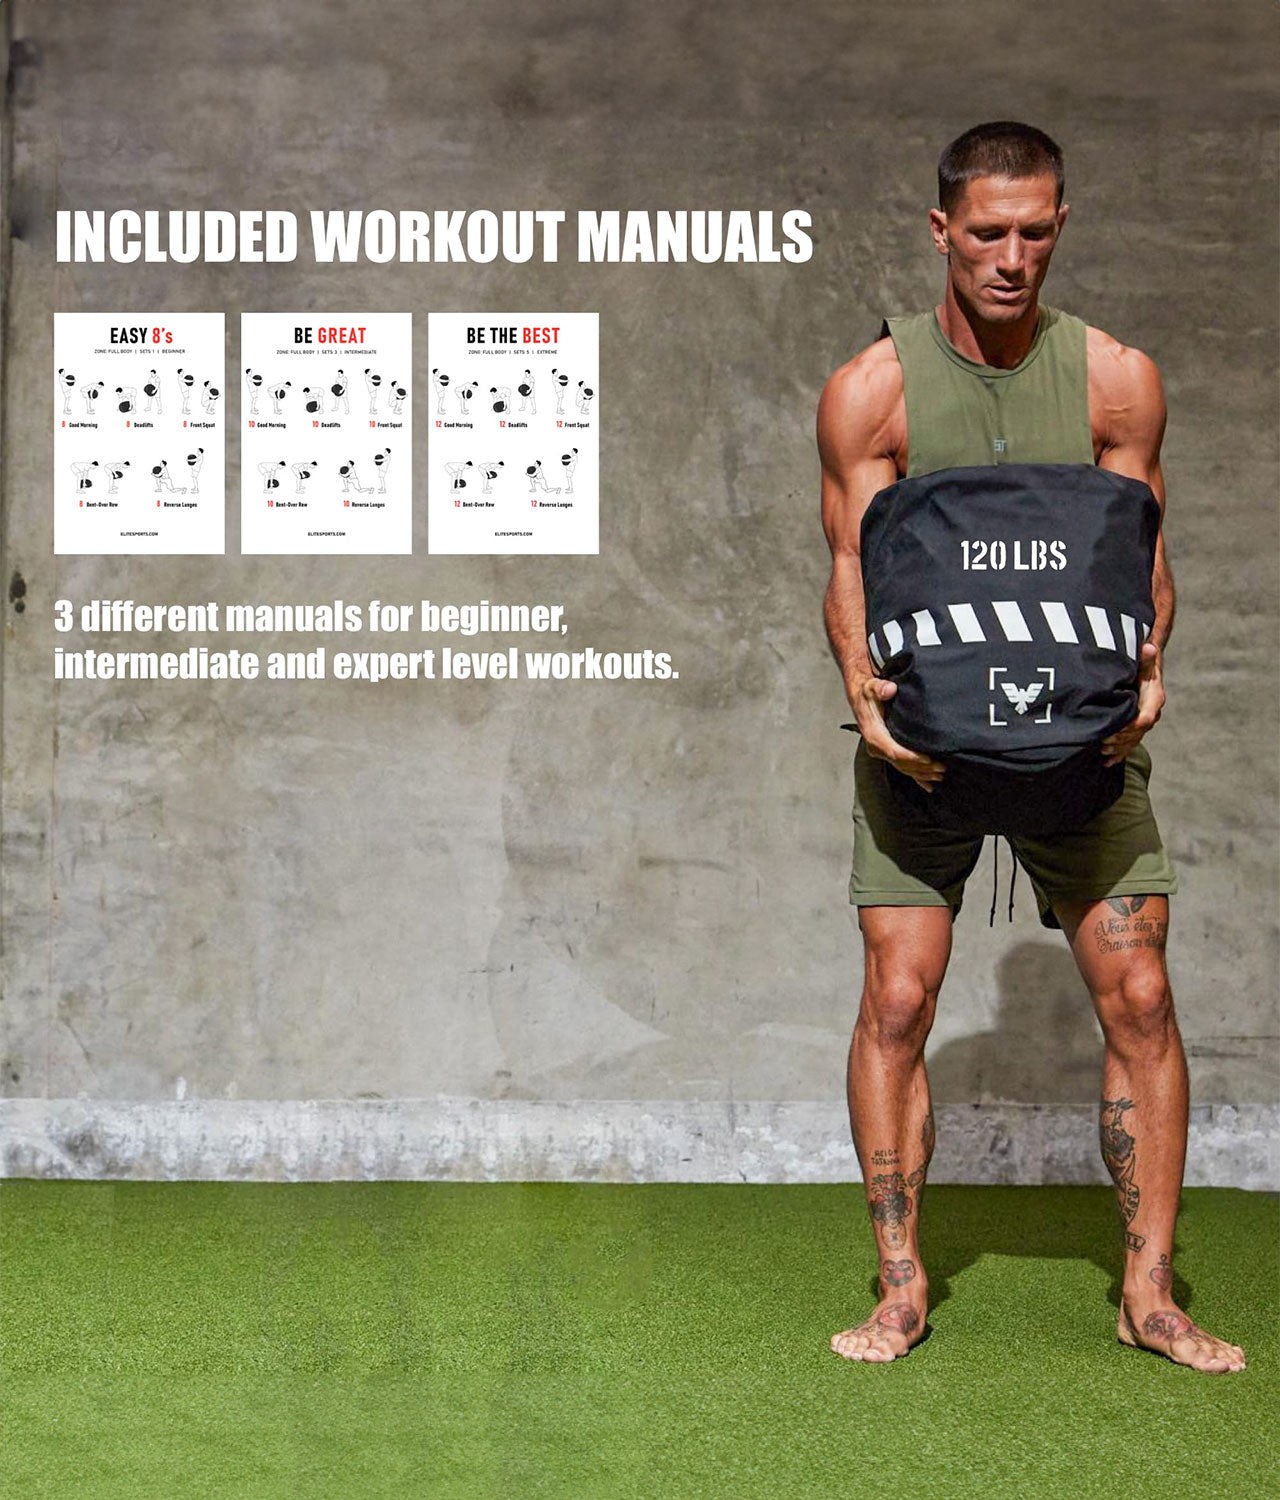 Elite Sports Core Round Workout Sandbag 120 lbs Included Workout Manuals